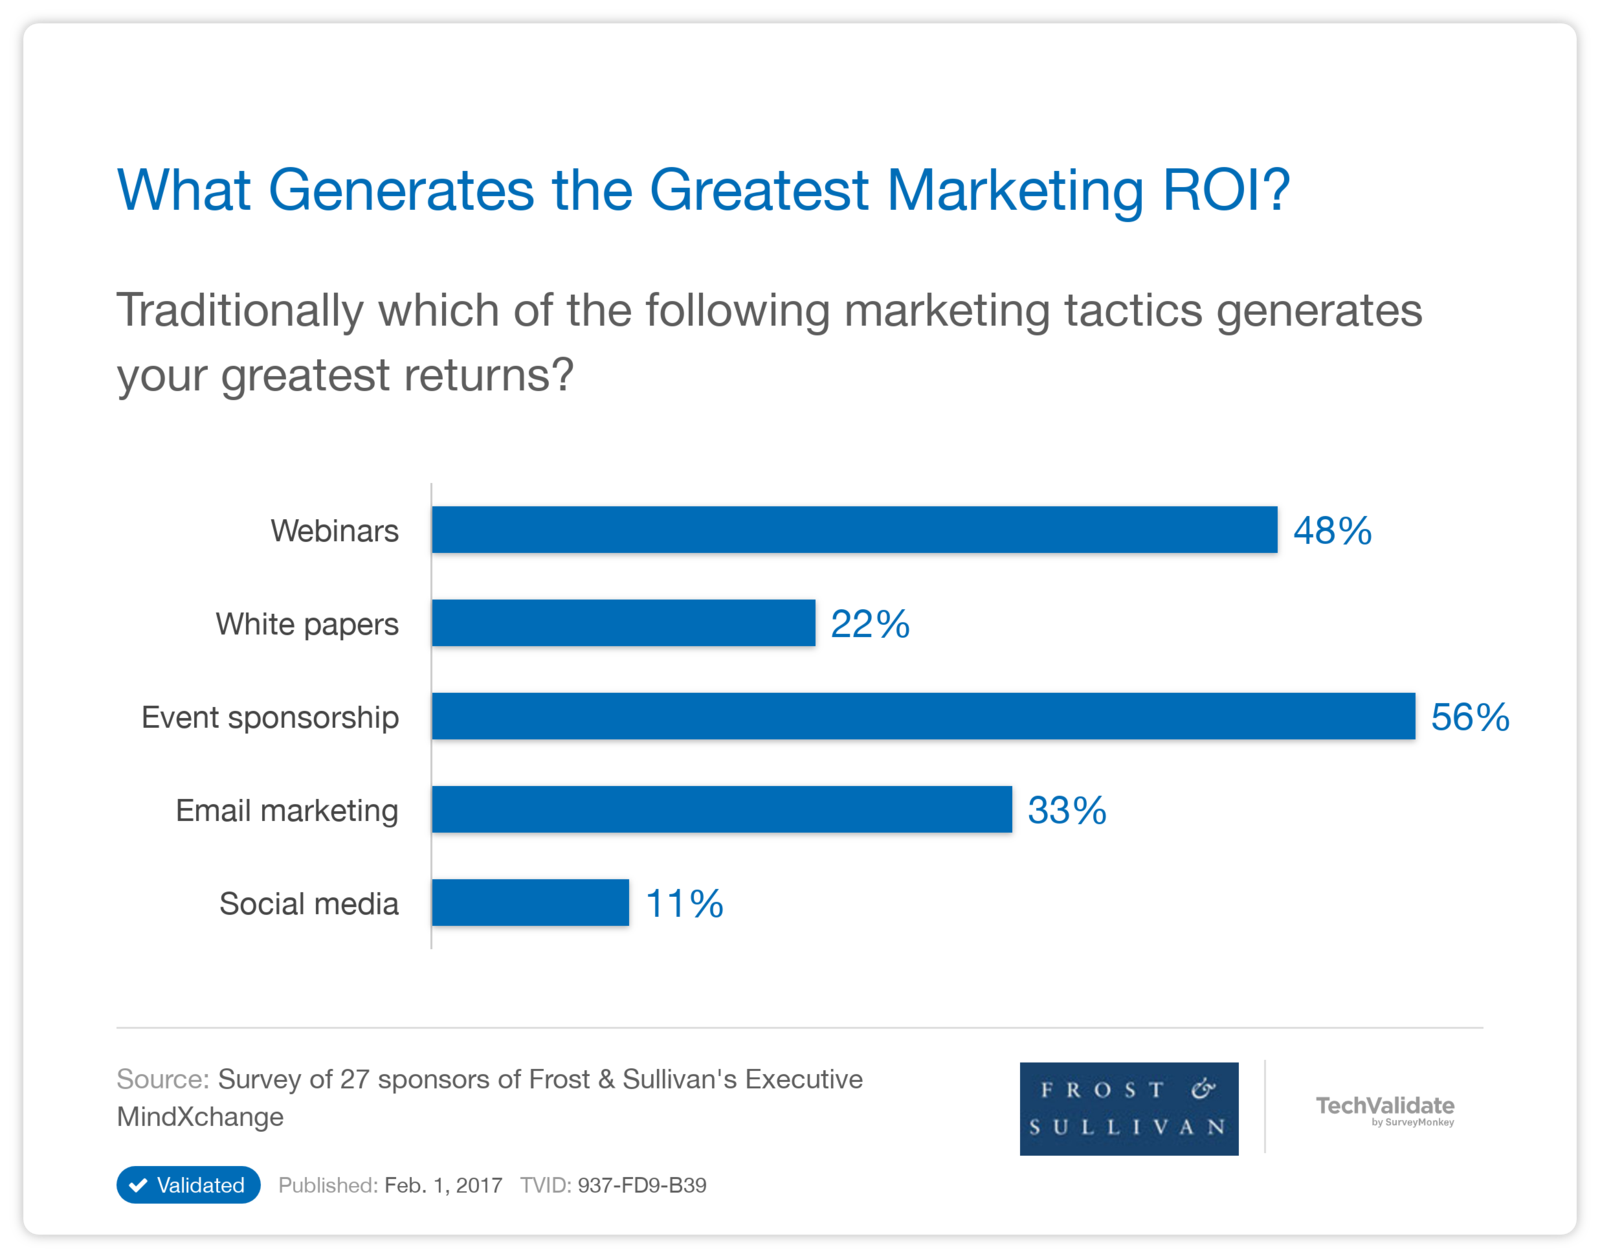 What Generates the Greatest Marketing ROI?